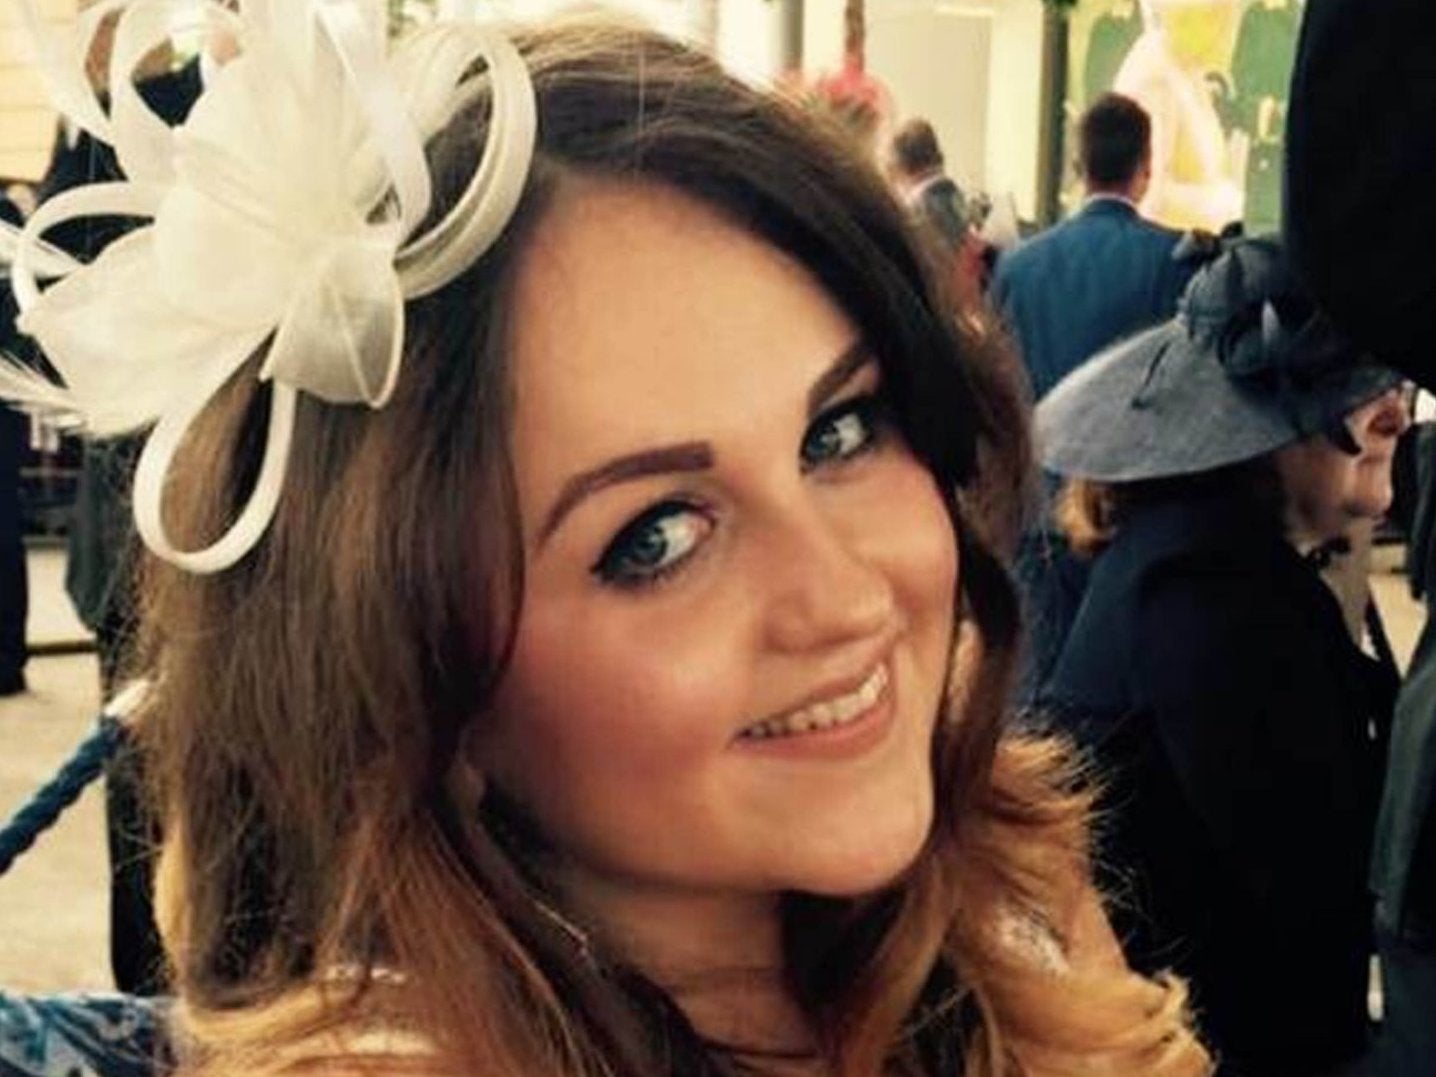 Charlotte Brown, 24, was killed in a speedboat crash on the River Thames while on a date with Jack Shepherd